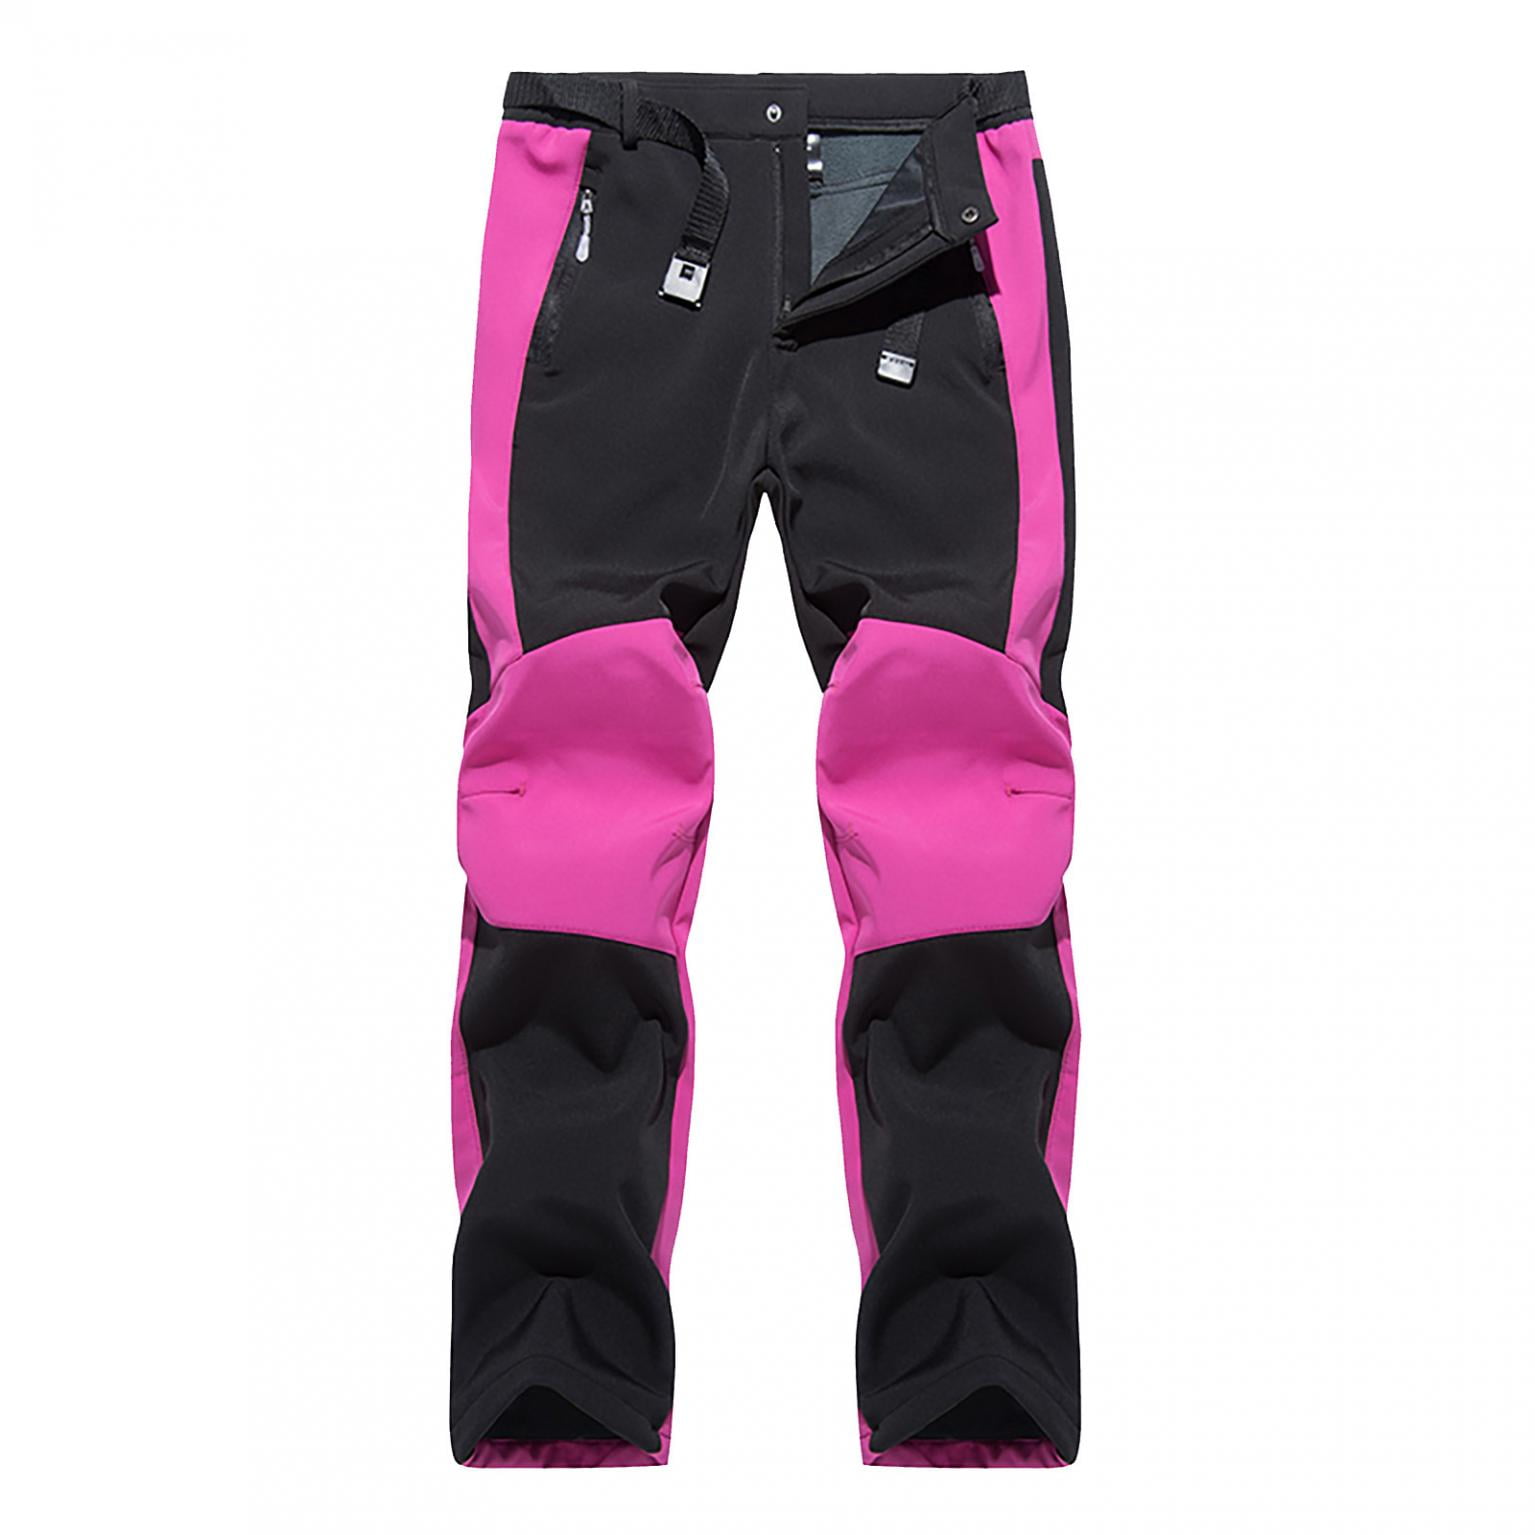 Nonwe Womens Outdoor Water-Resistant Warmth Fleece Lined Climbing Ski Snow Pants